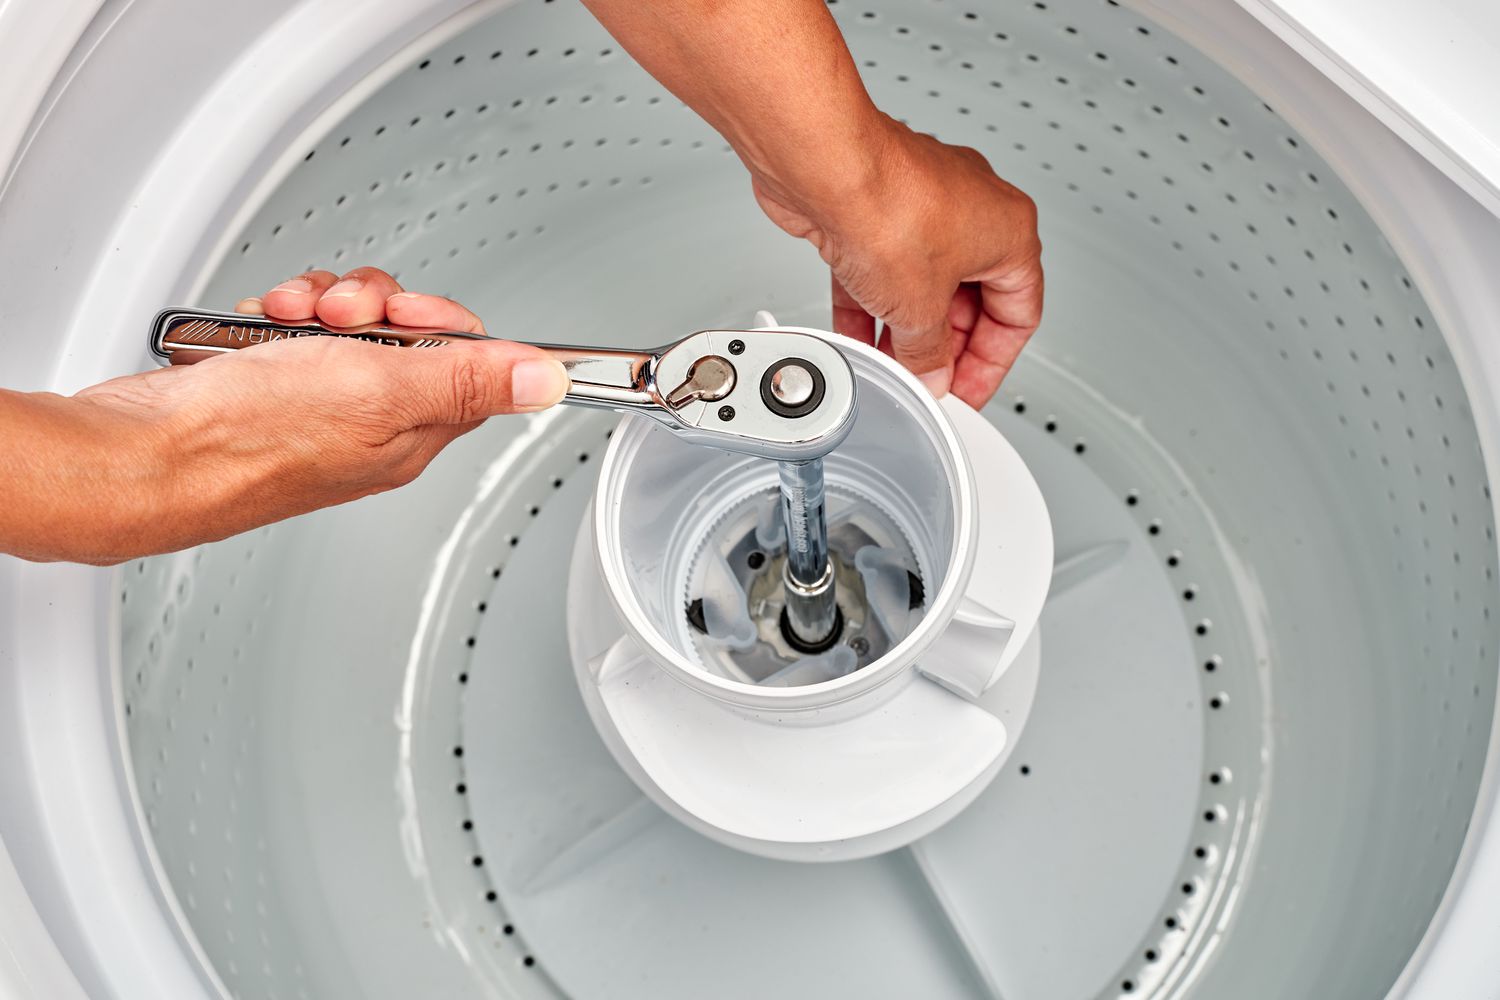 How To Remove Agitator From A Whirlpool Washing Machine